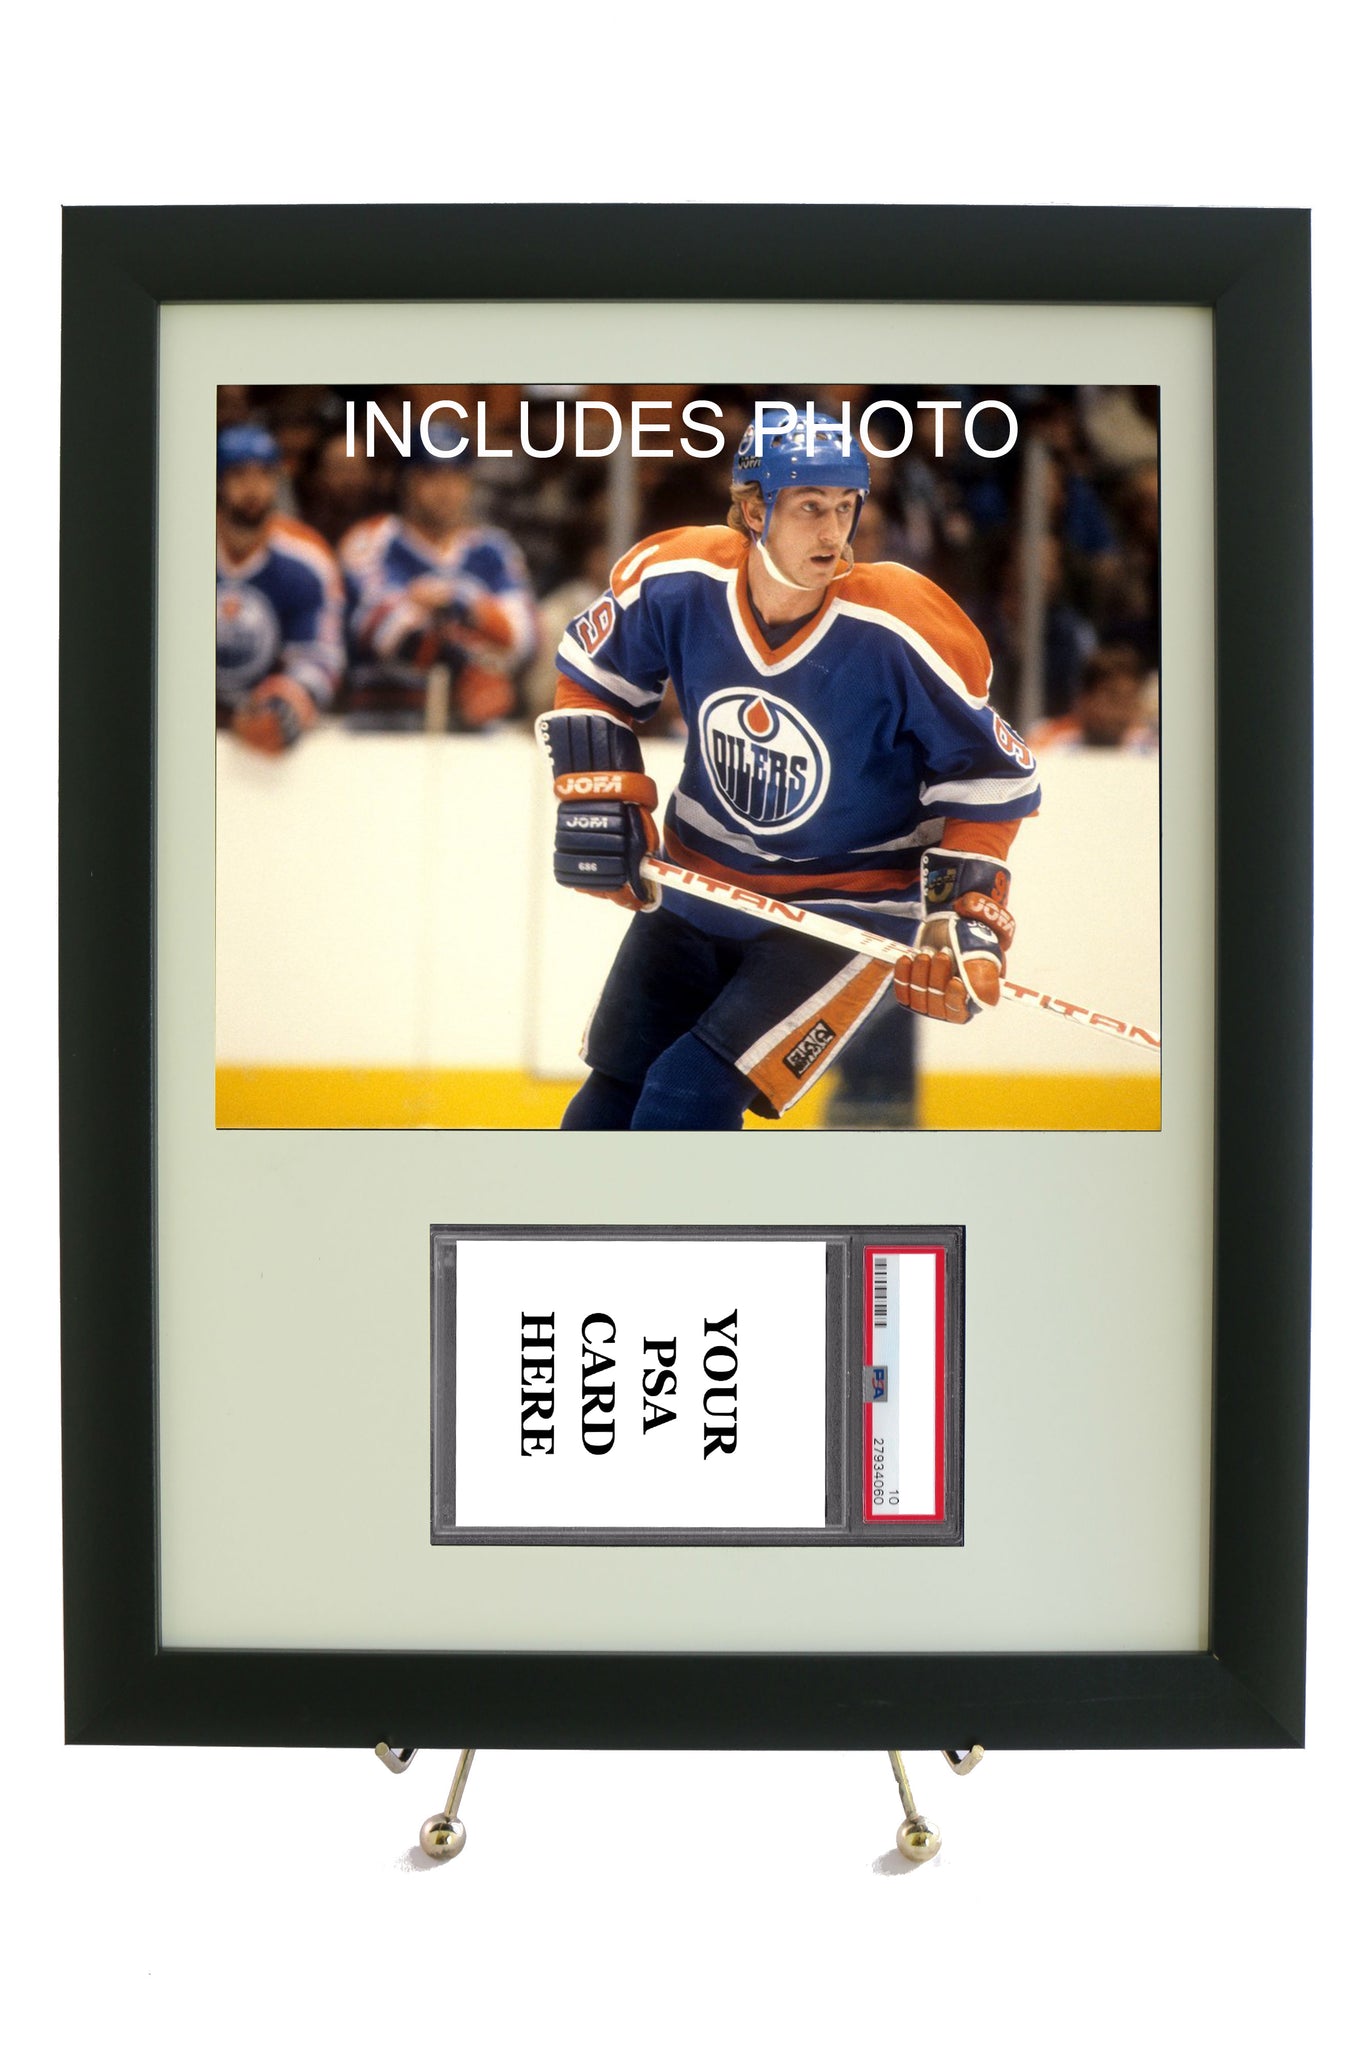 Sports Card Frame for YOUR Wayne Gretzky Horizontal PSA Graded Card (INCLUDES PHOTO) - Graded And Framed